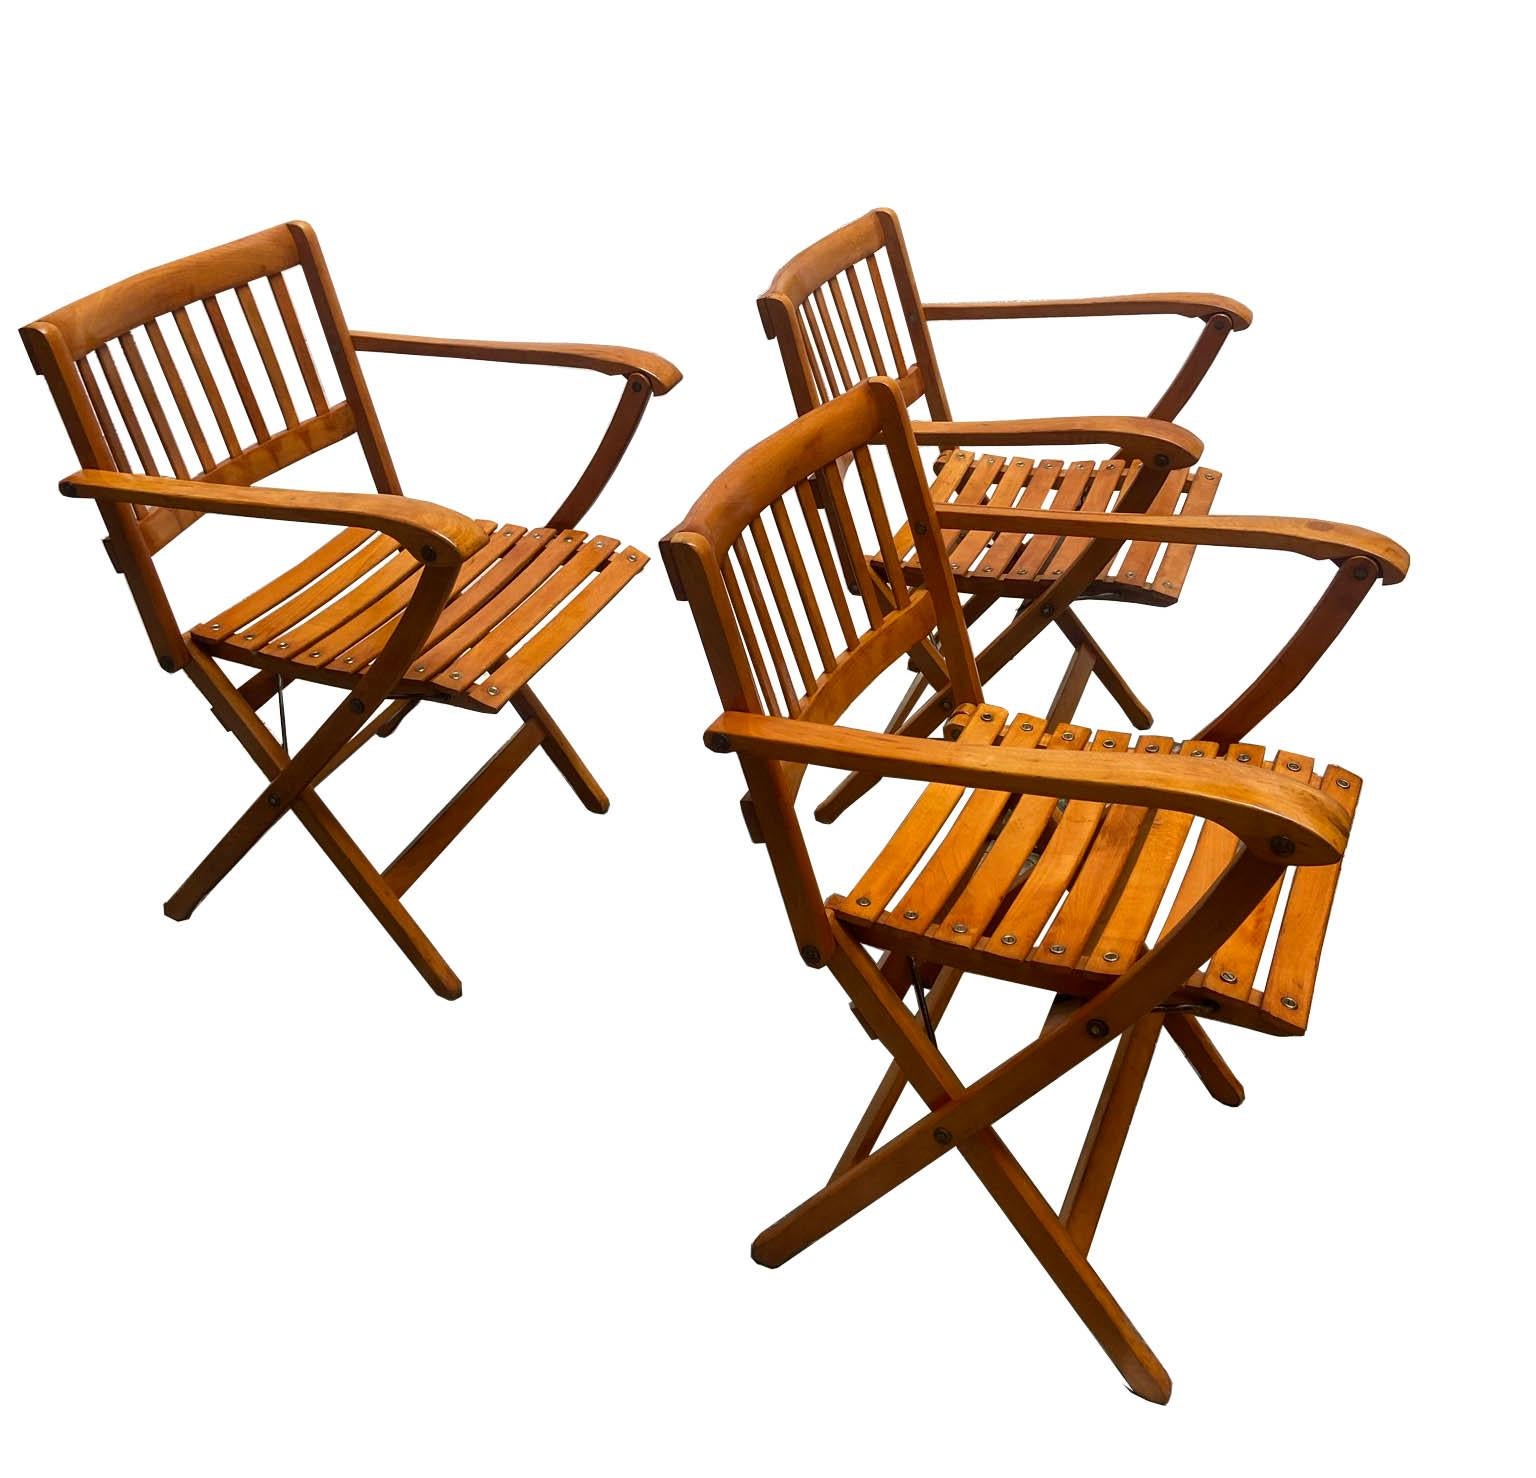 Group of three beautiful garden chairs with armrests, folding, produced by Fratelli Reguitti, Italy, 1970. The chairs are branded and in beech wood.